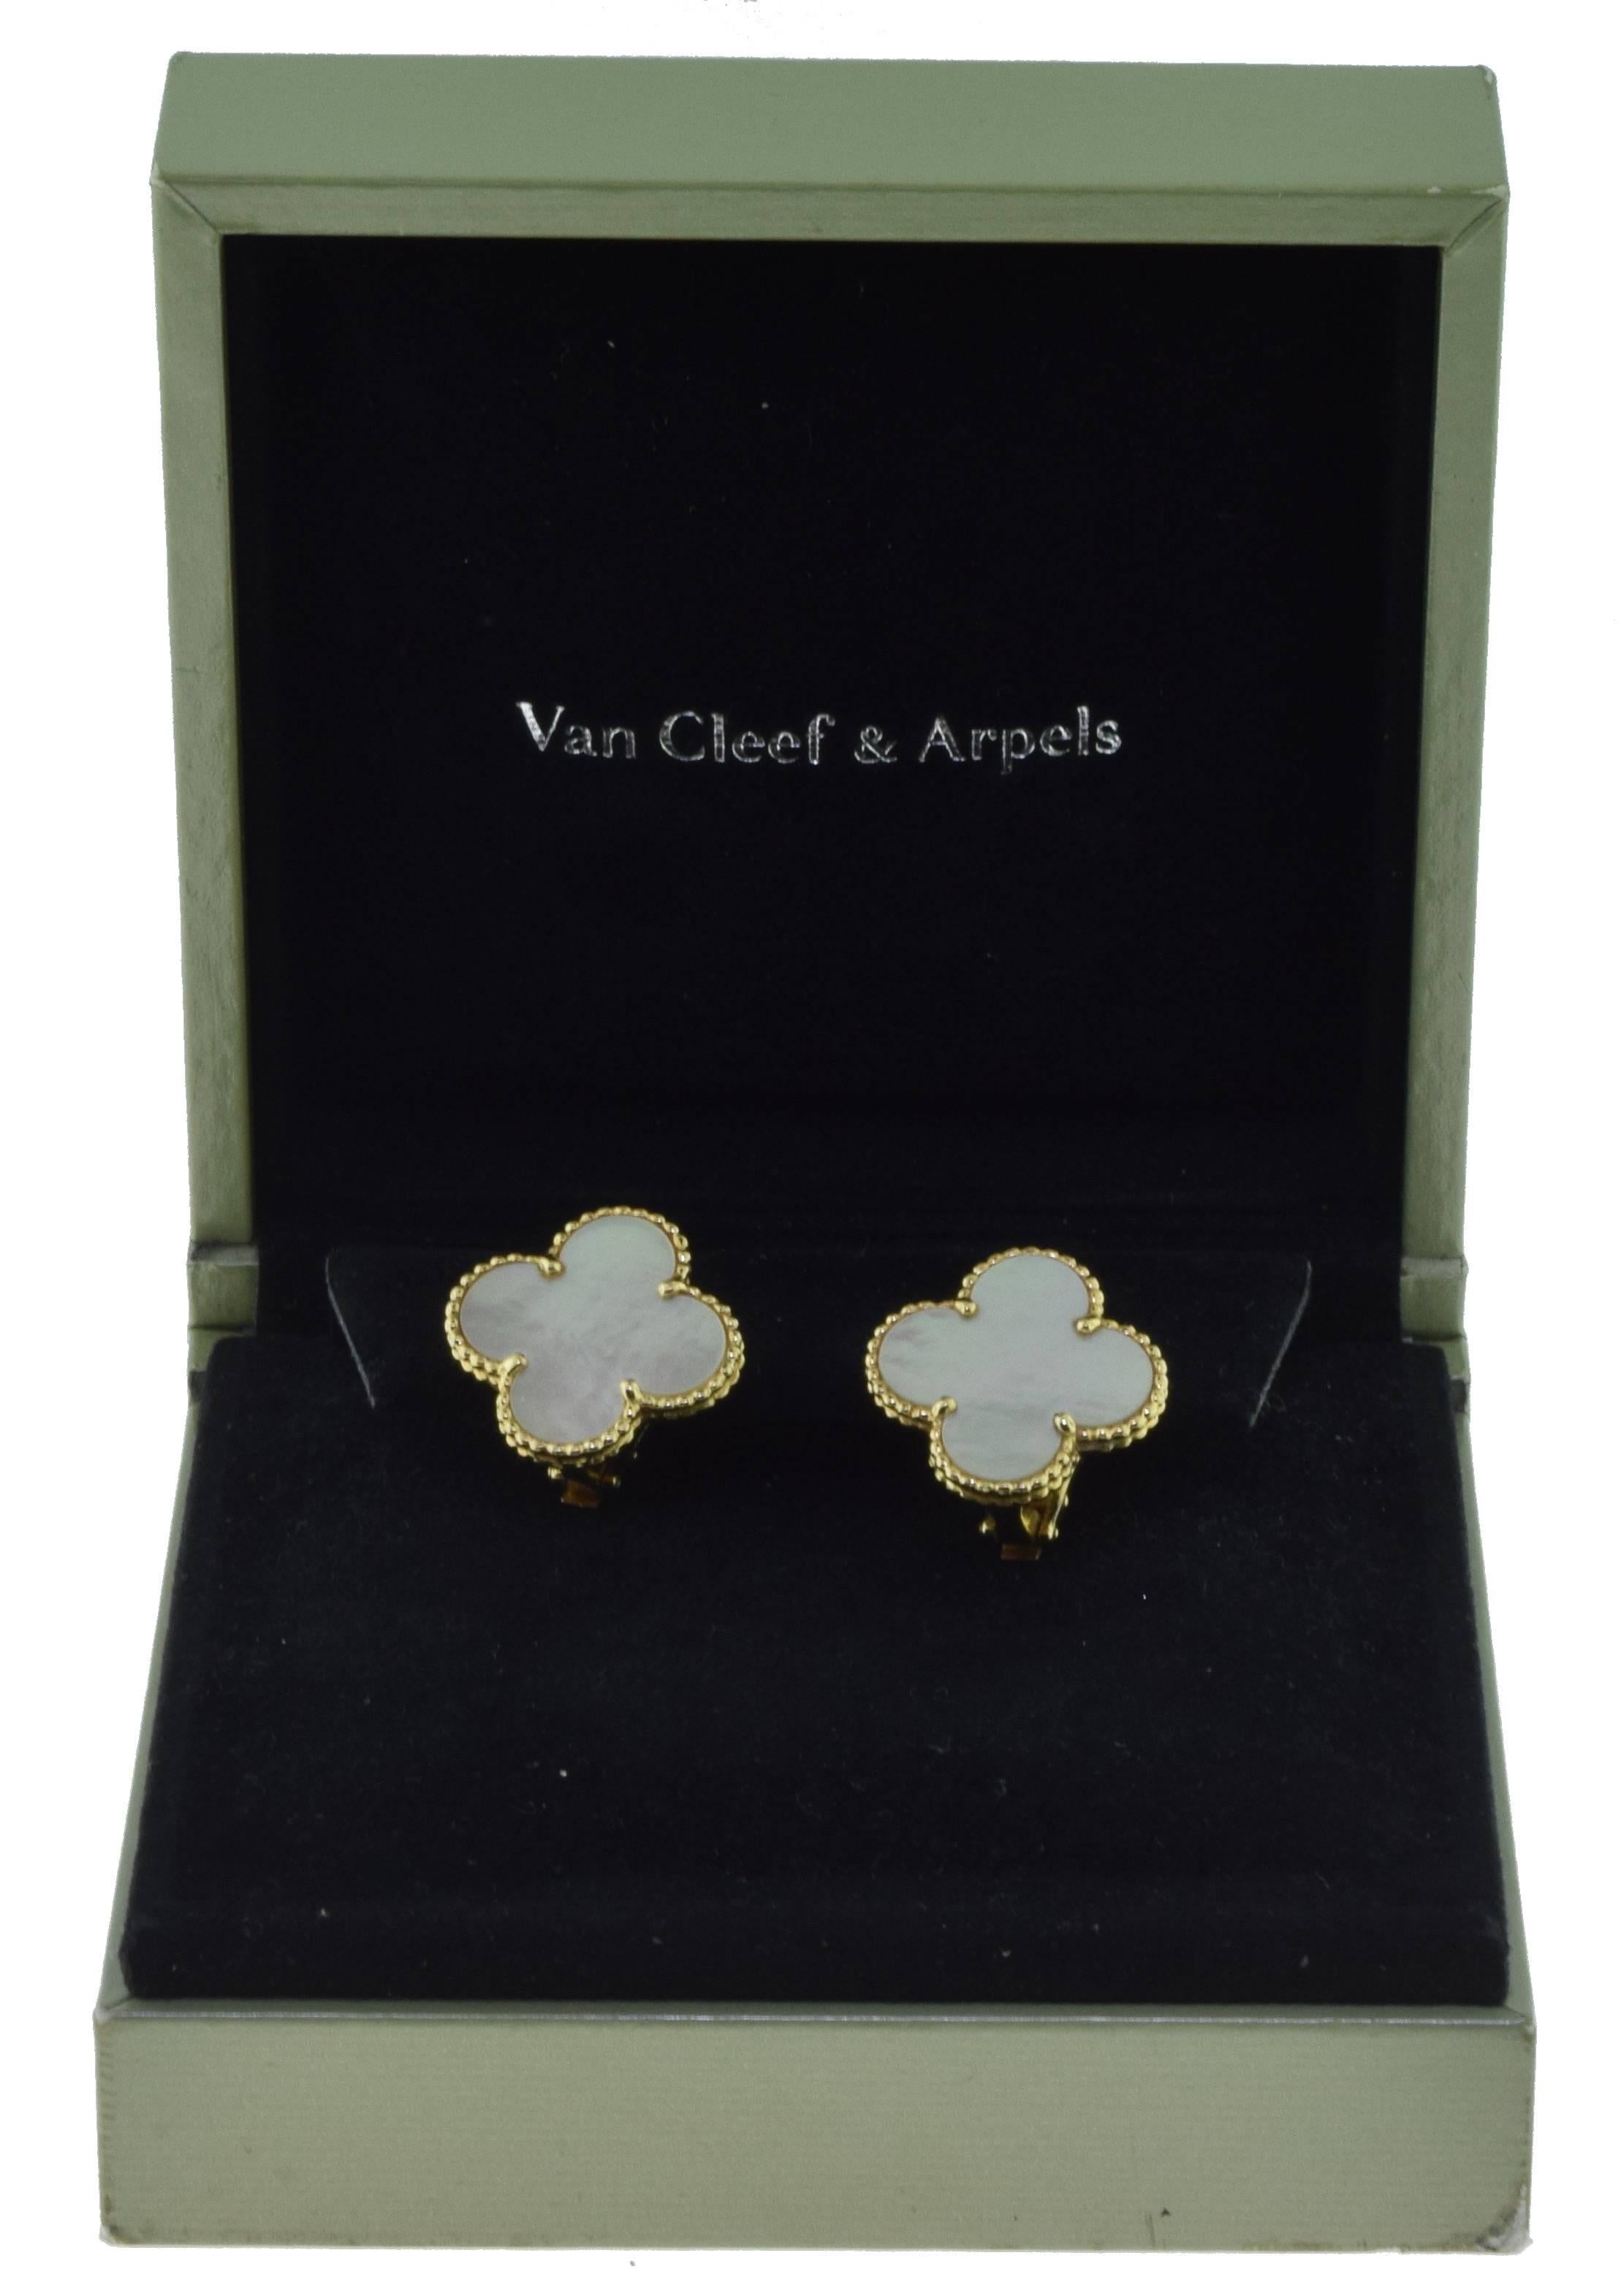 Van Cleef & Arpels Magic Alhambra Mother-of-Pearl Yellow Gold Large Earrings In Excellent Condition For Sale In Miami, FL